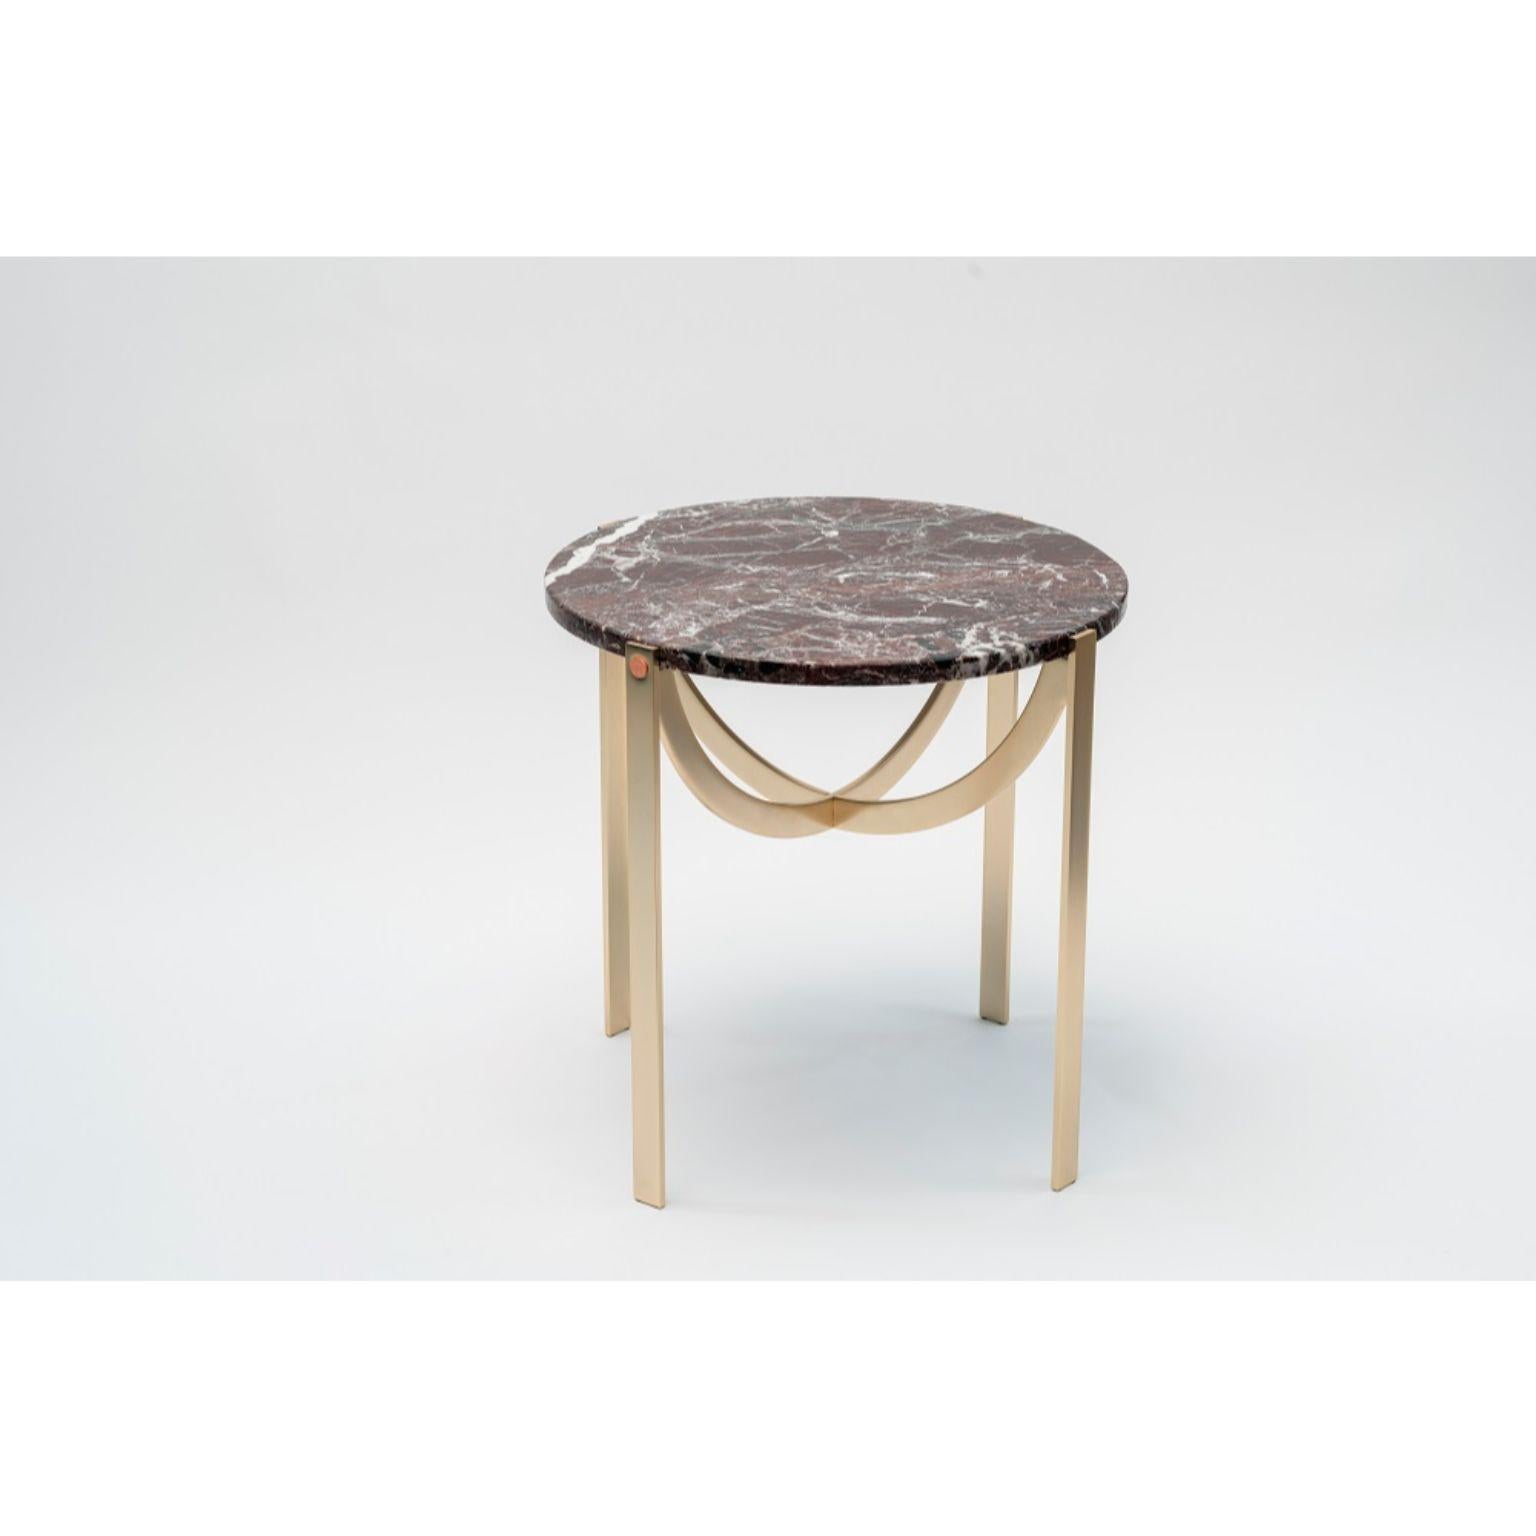 Medium Astra coffee table by Patrick Norguet
Materials: Marble and metal structure
Dimensions: Ø 81.6 x H 41.8 cm

The Astra family of coffee tables surprises by its sophisticated simplicity.
It was named as a tribute to those old instruments,